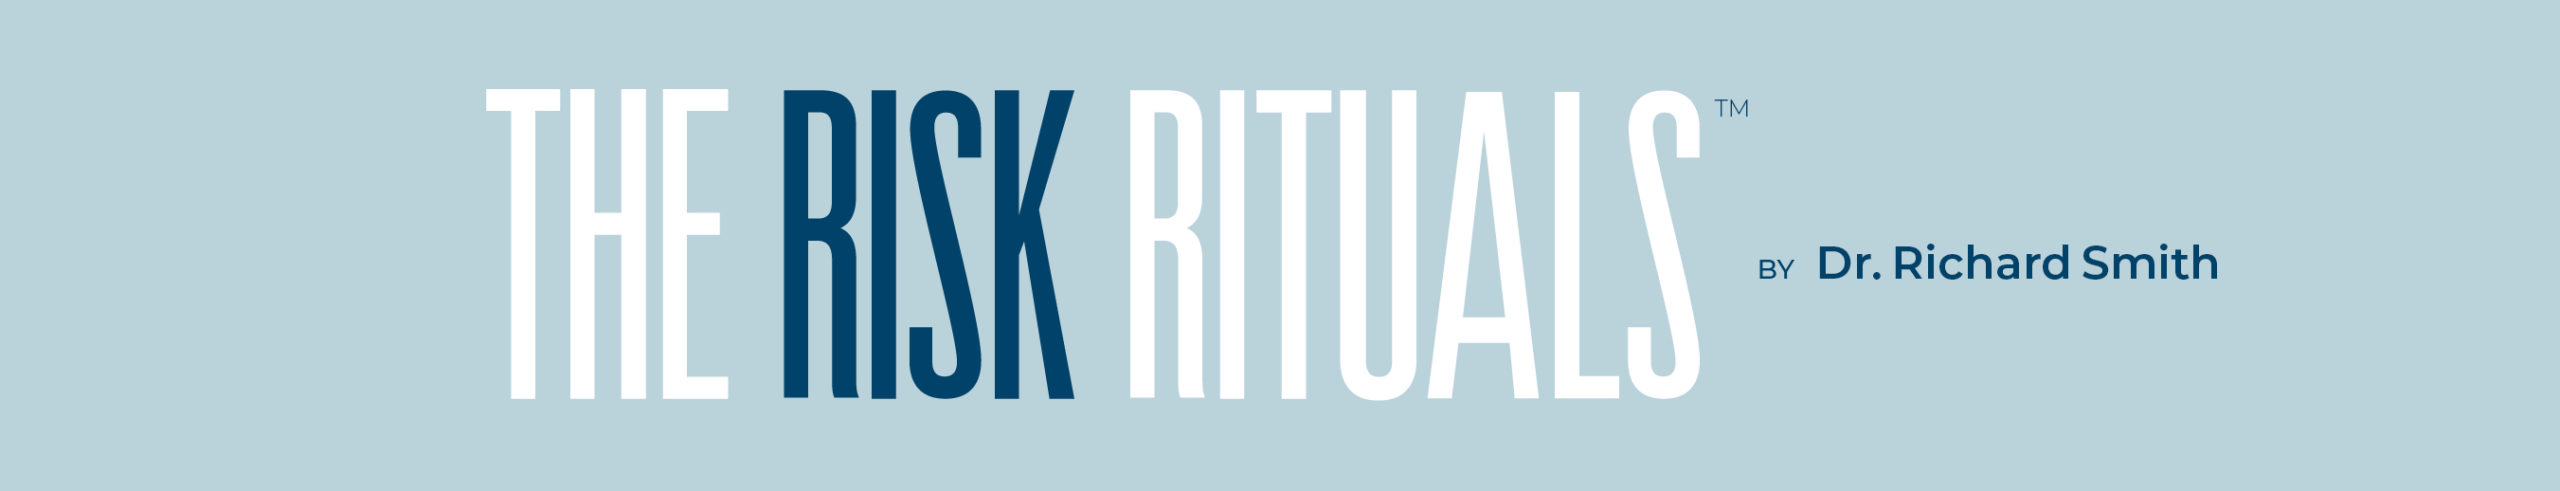 RISK Rituals by Dr. Richard Smith